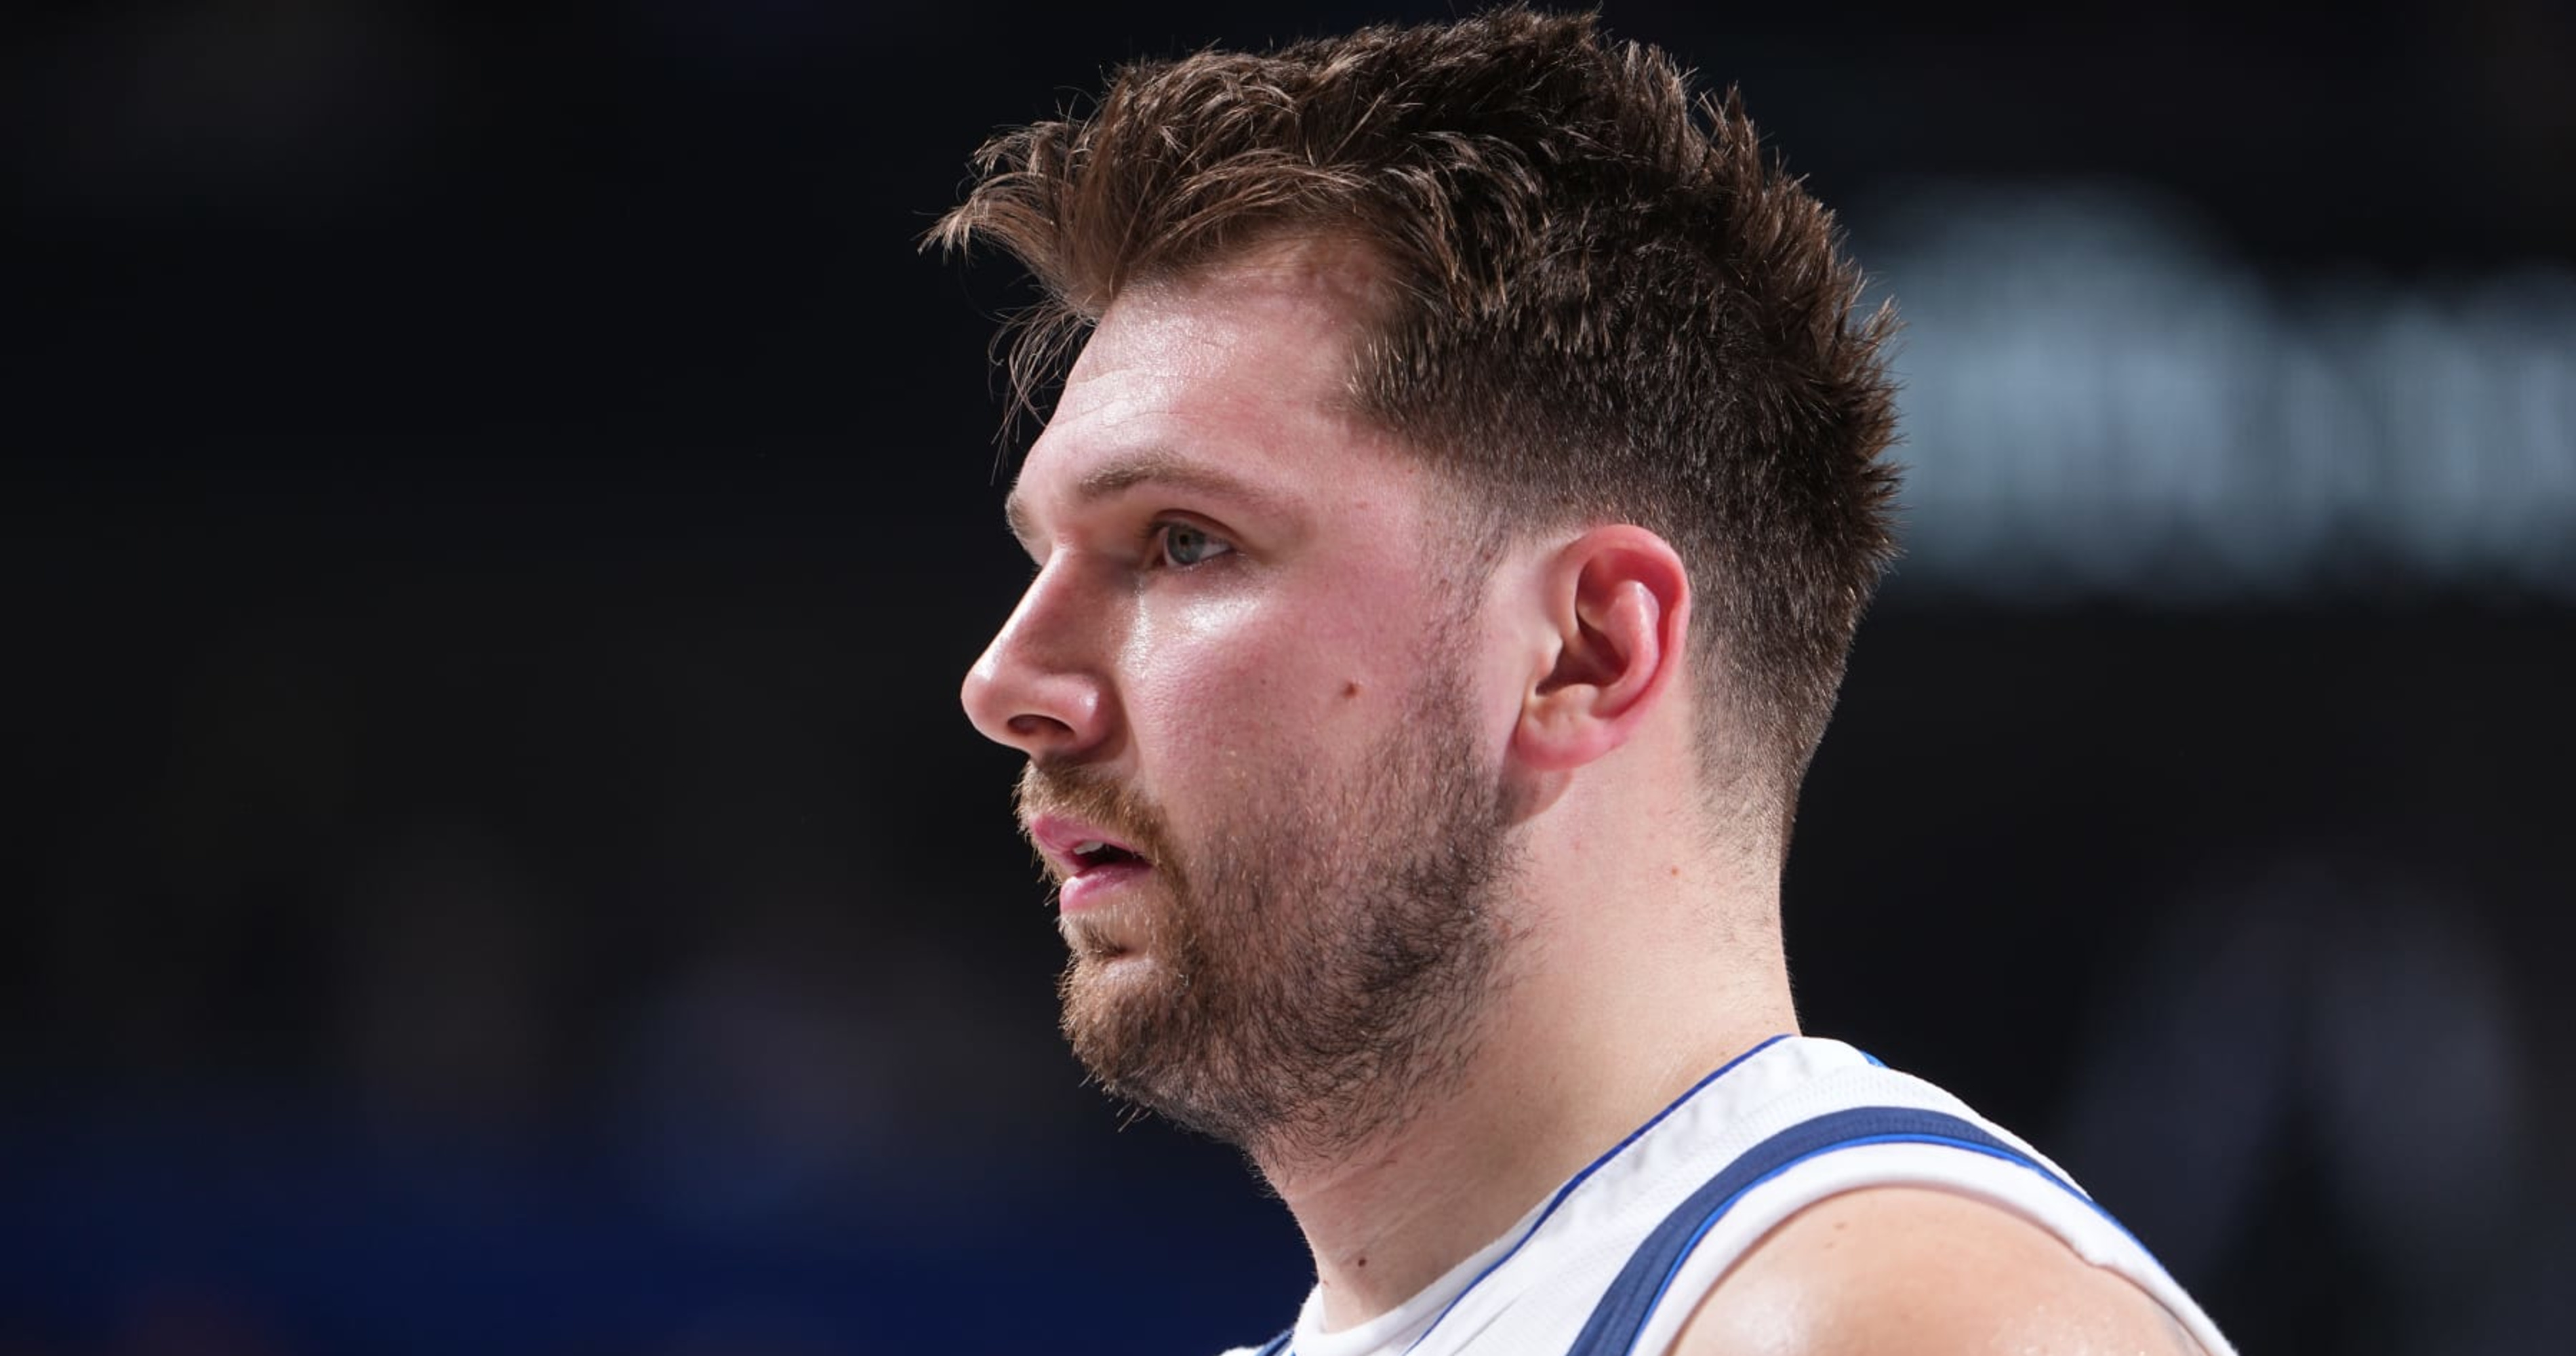 Luka Dončić Dominates Scrimmage with 26-6 Run After Challenge